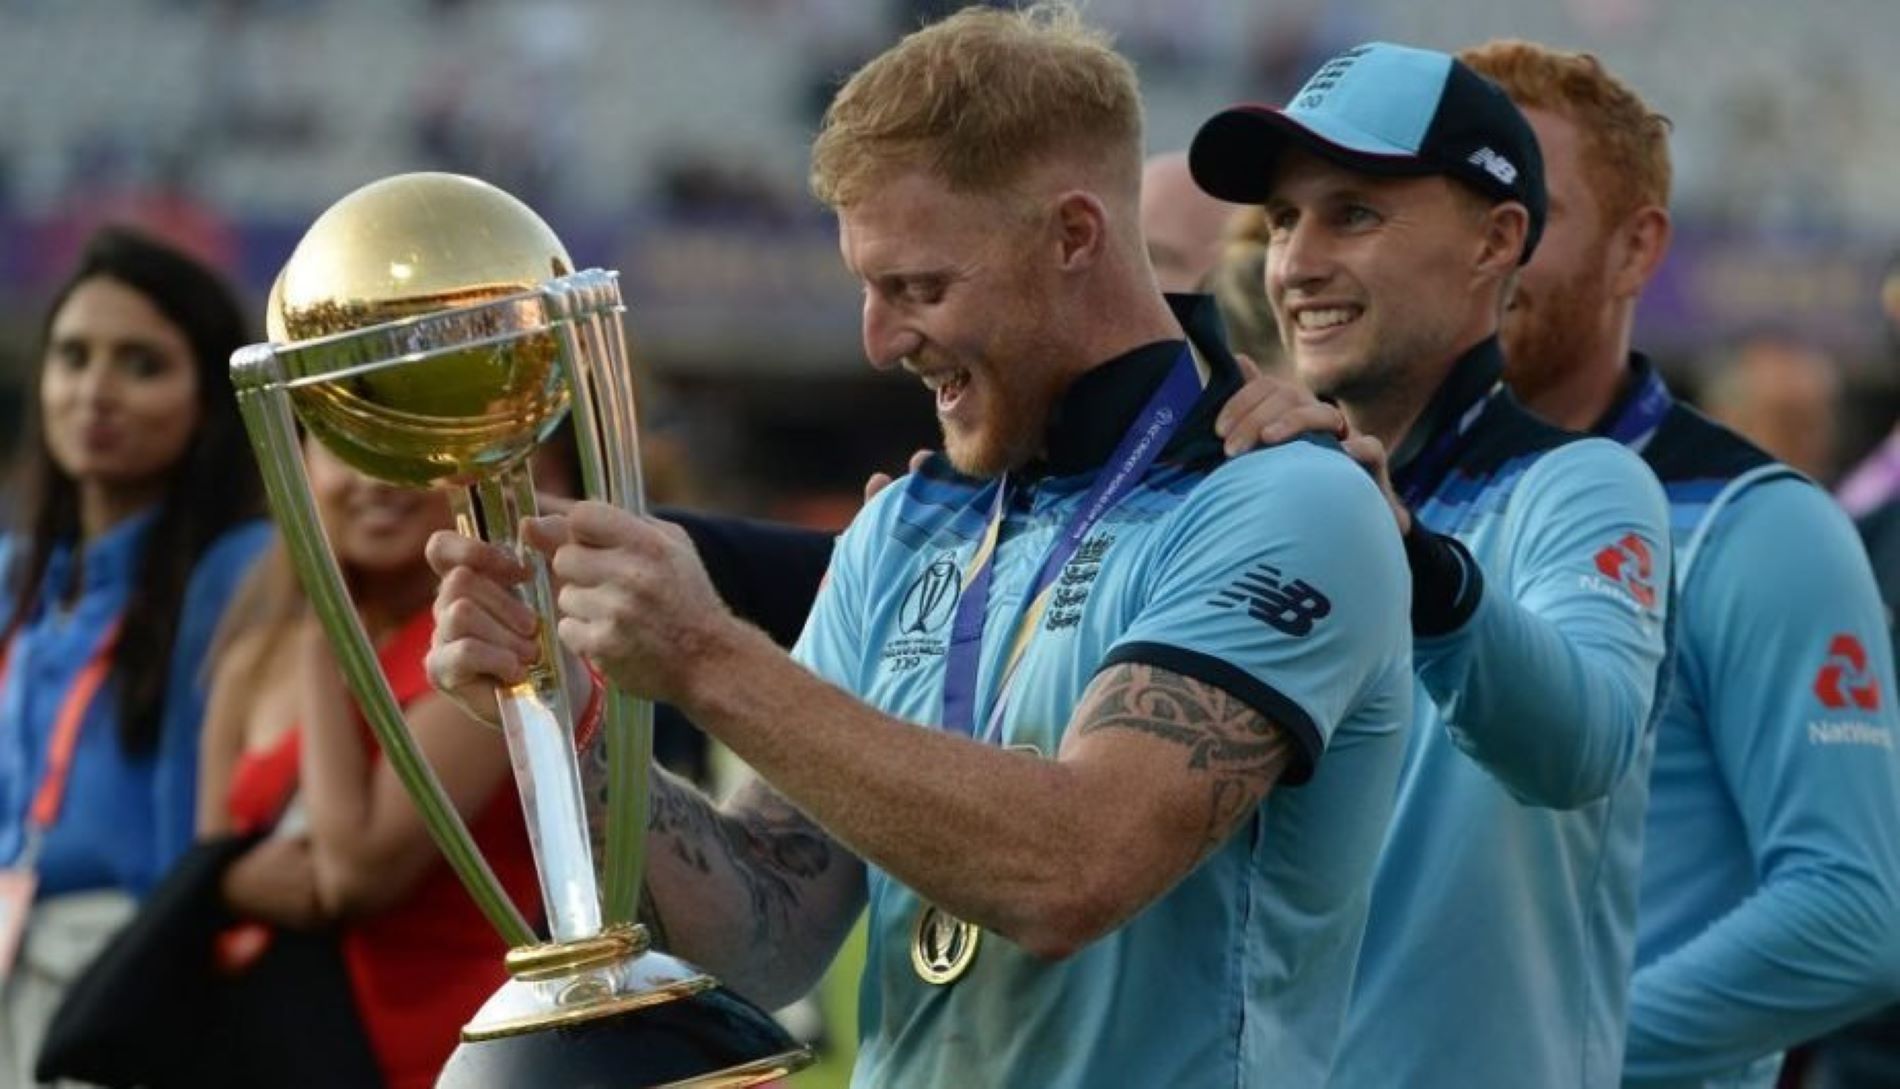 Stokes played one of the most memorable knocks in the 2019 World Cup final.